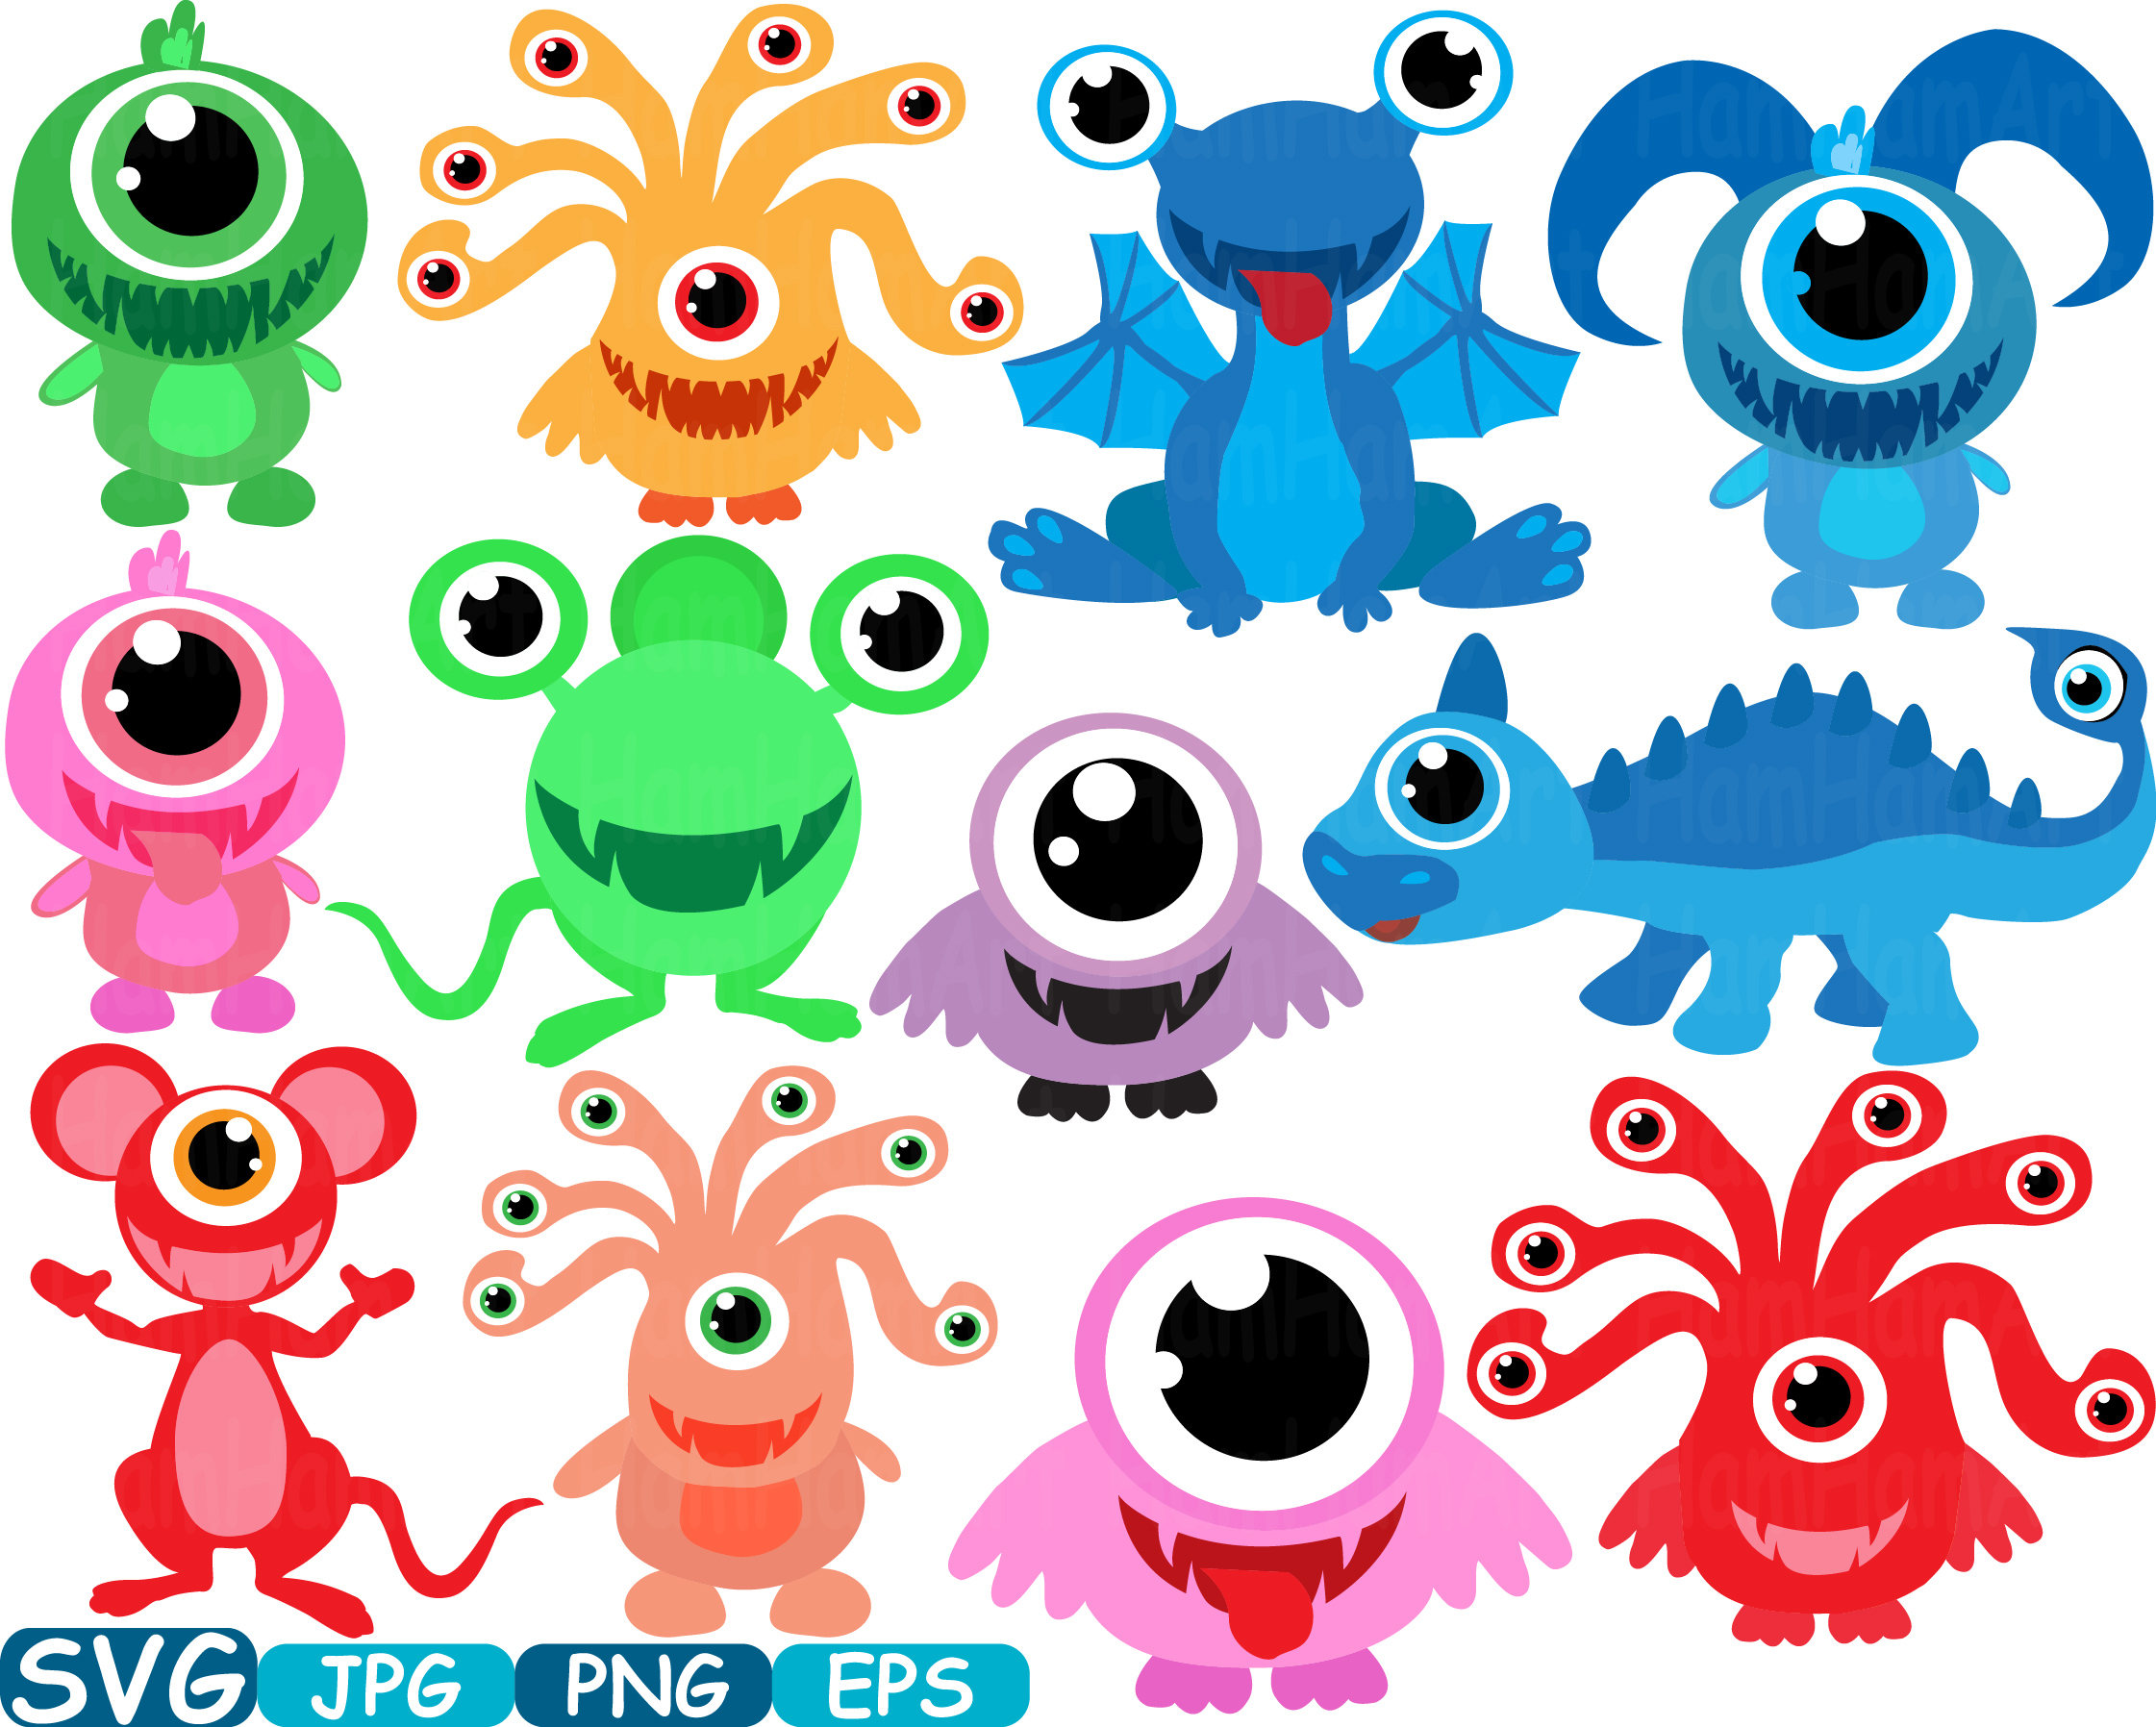 Download Cute Little Monster Elien Cutting file SVG Birthday Party